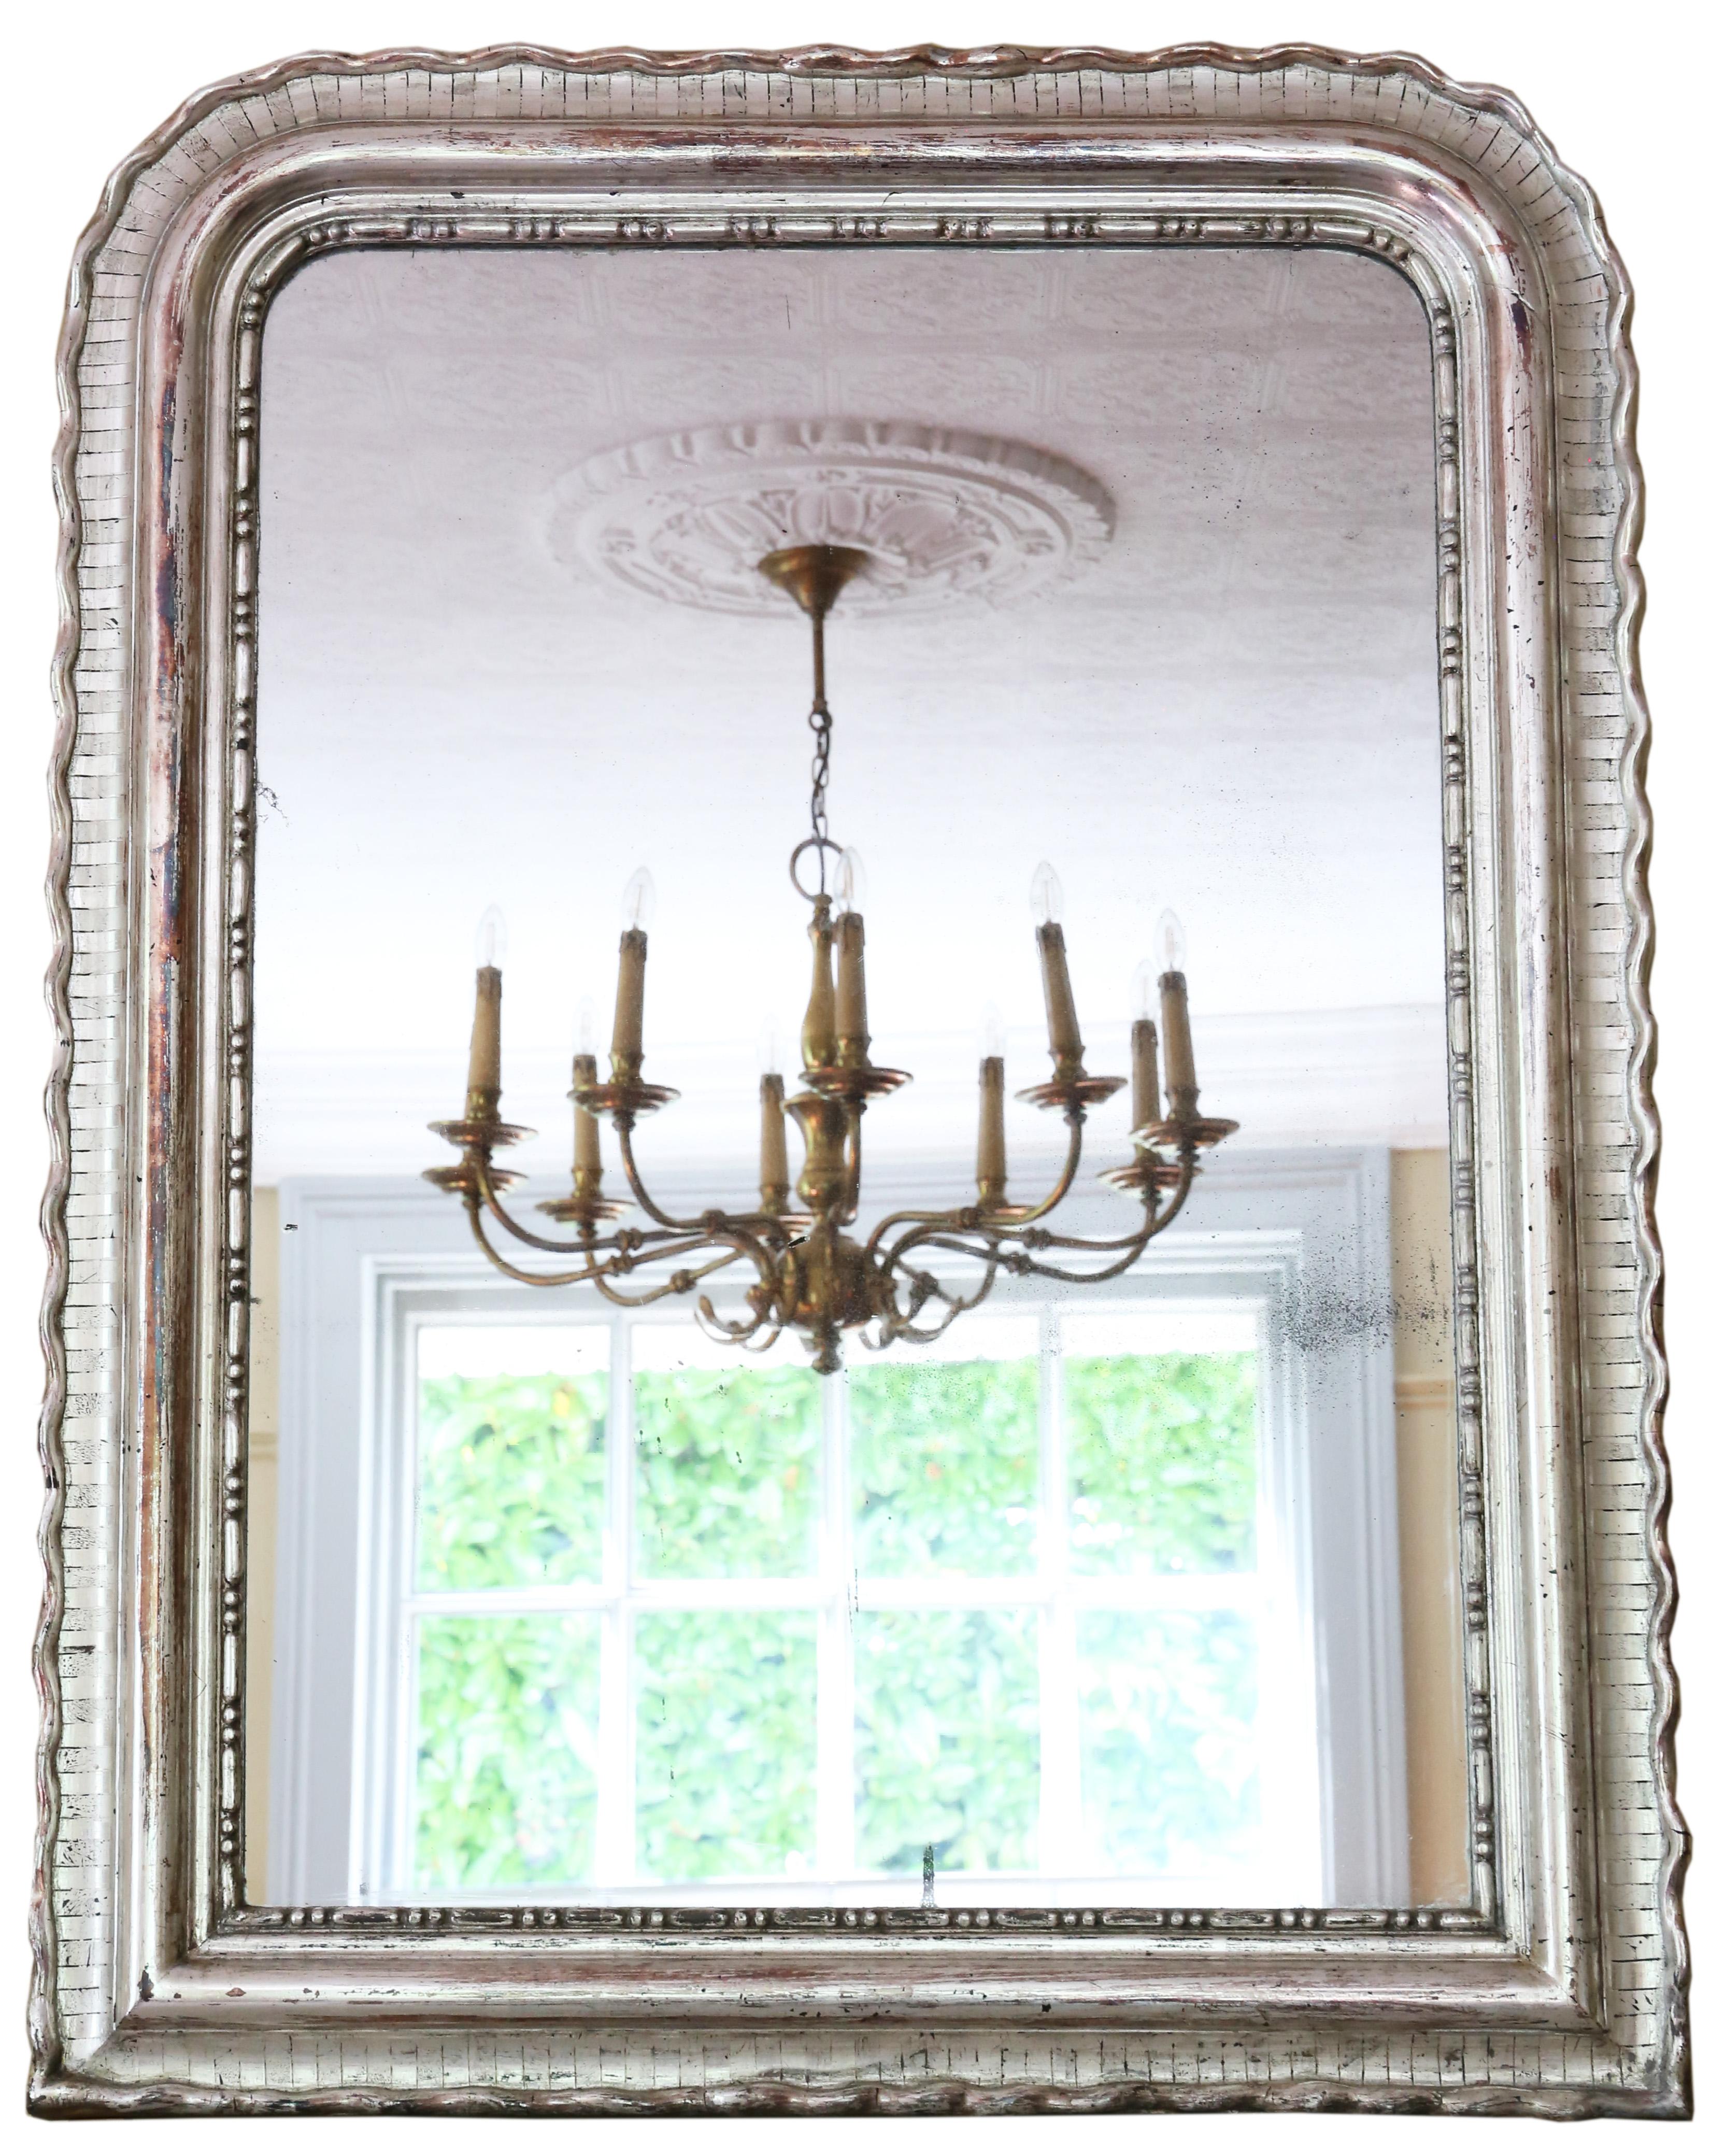 Antique fine quality large silver gilt 19th Century overmantle or wall mirror with a lovely charm and elegance.

This is a lovely, rare mirror and a great decorative find. Quality mirrors with silver gilding are so hard to find.

An impressive